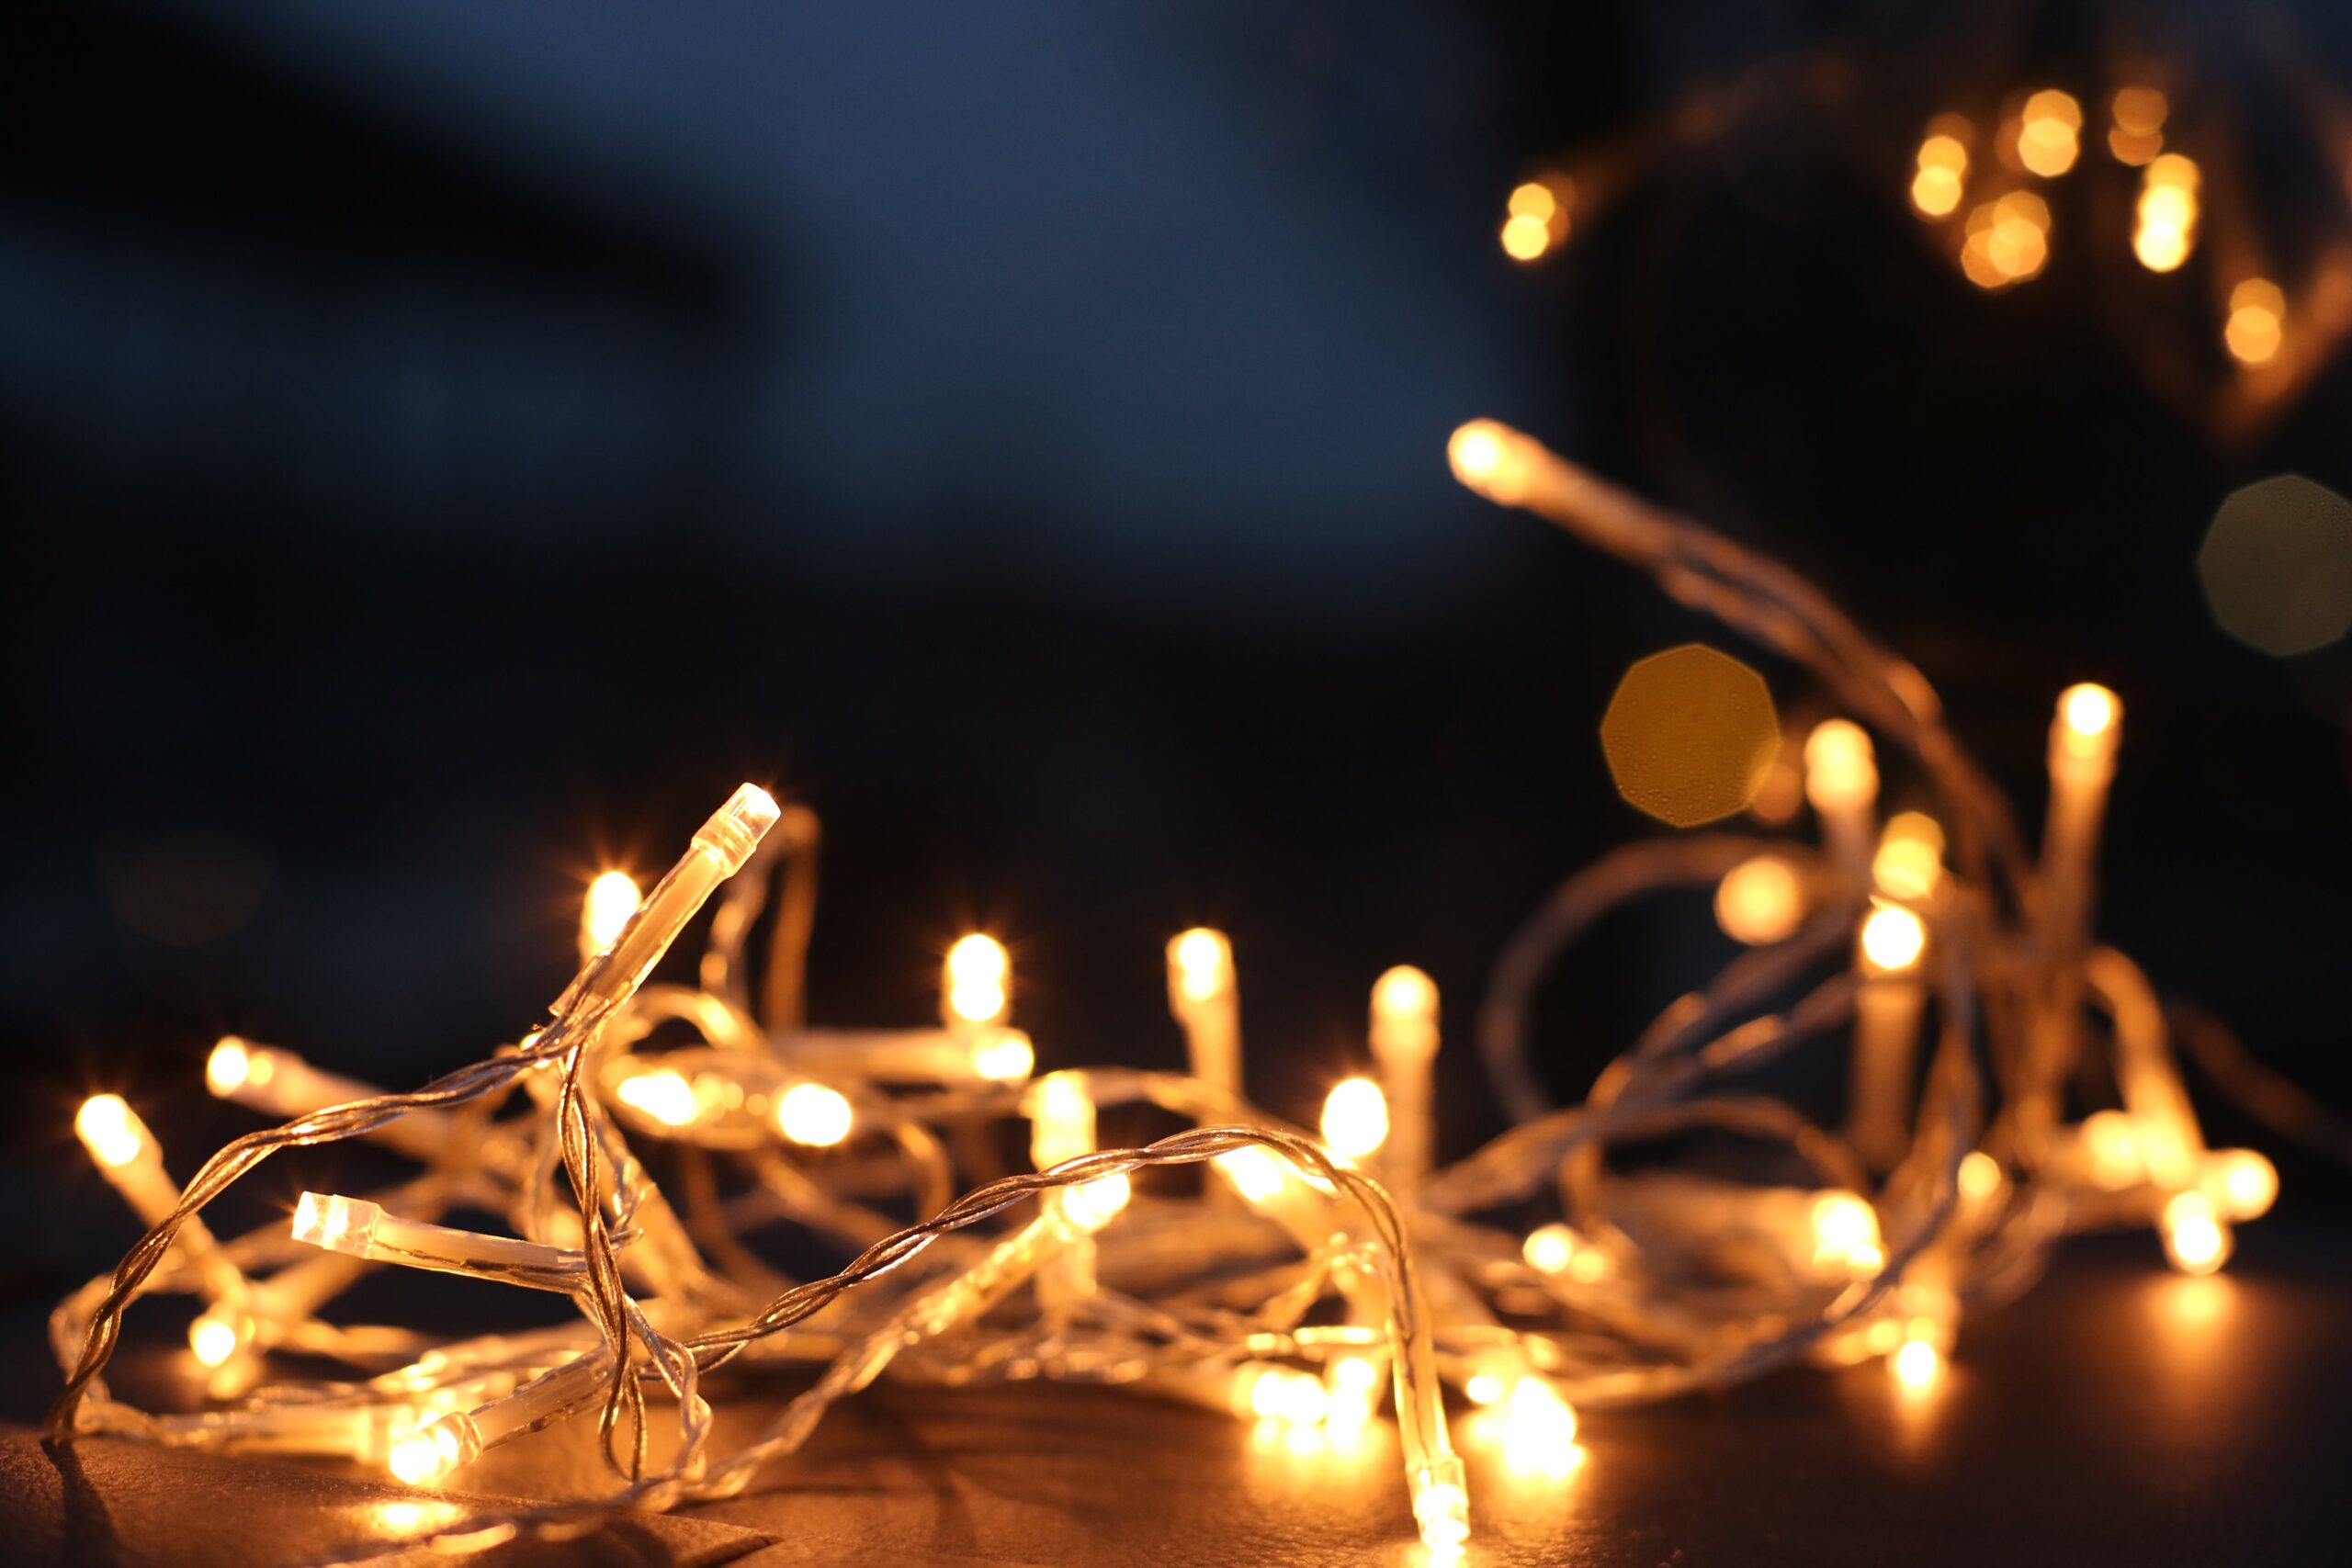 A string of white lights used in holiday decorating symbolizing navigating grief during the holidays.